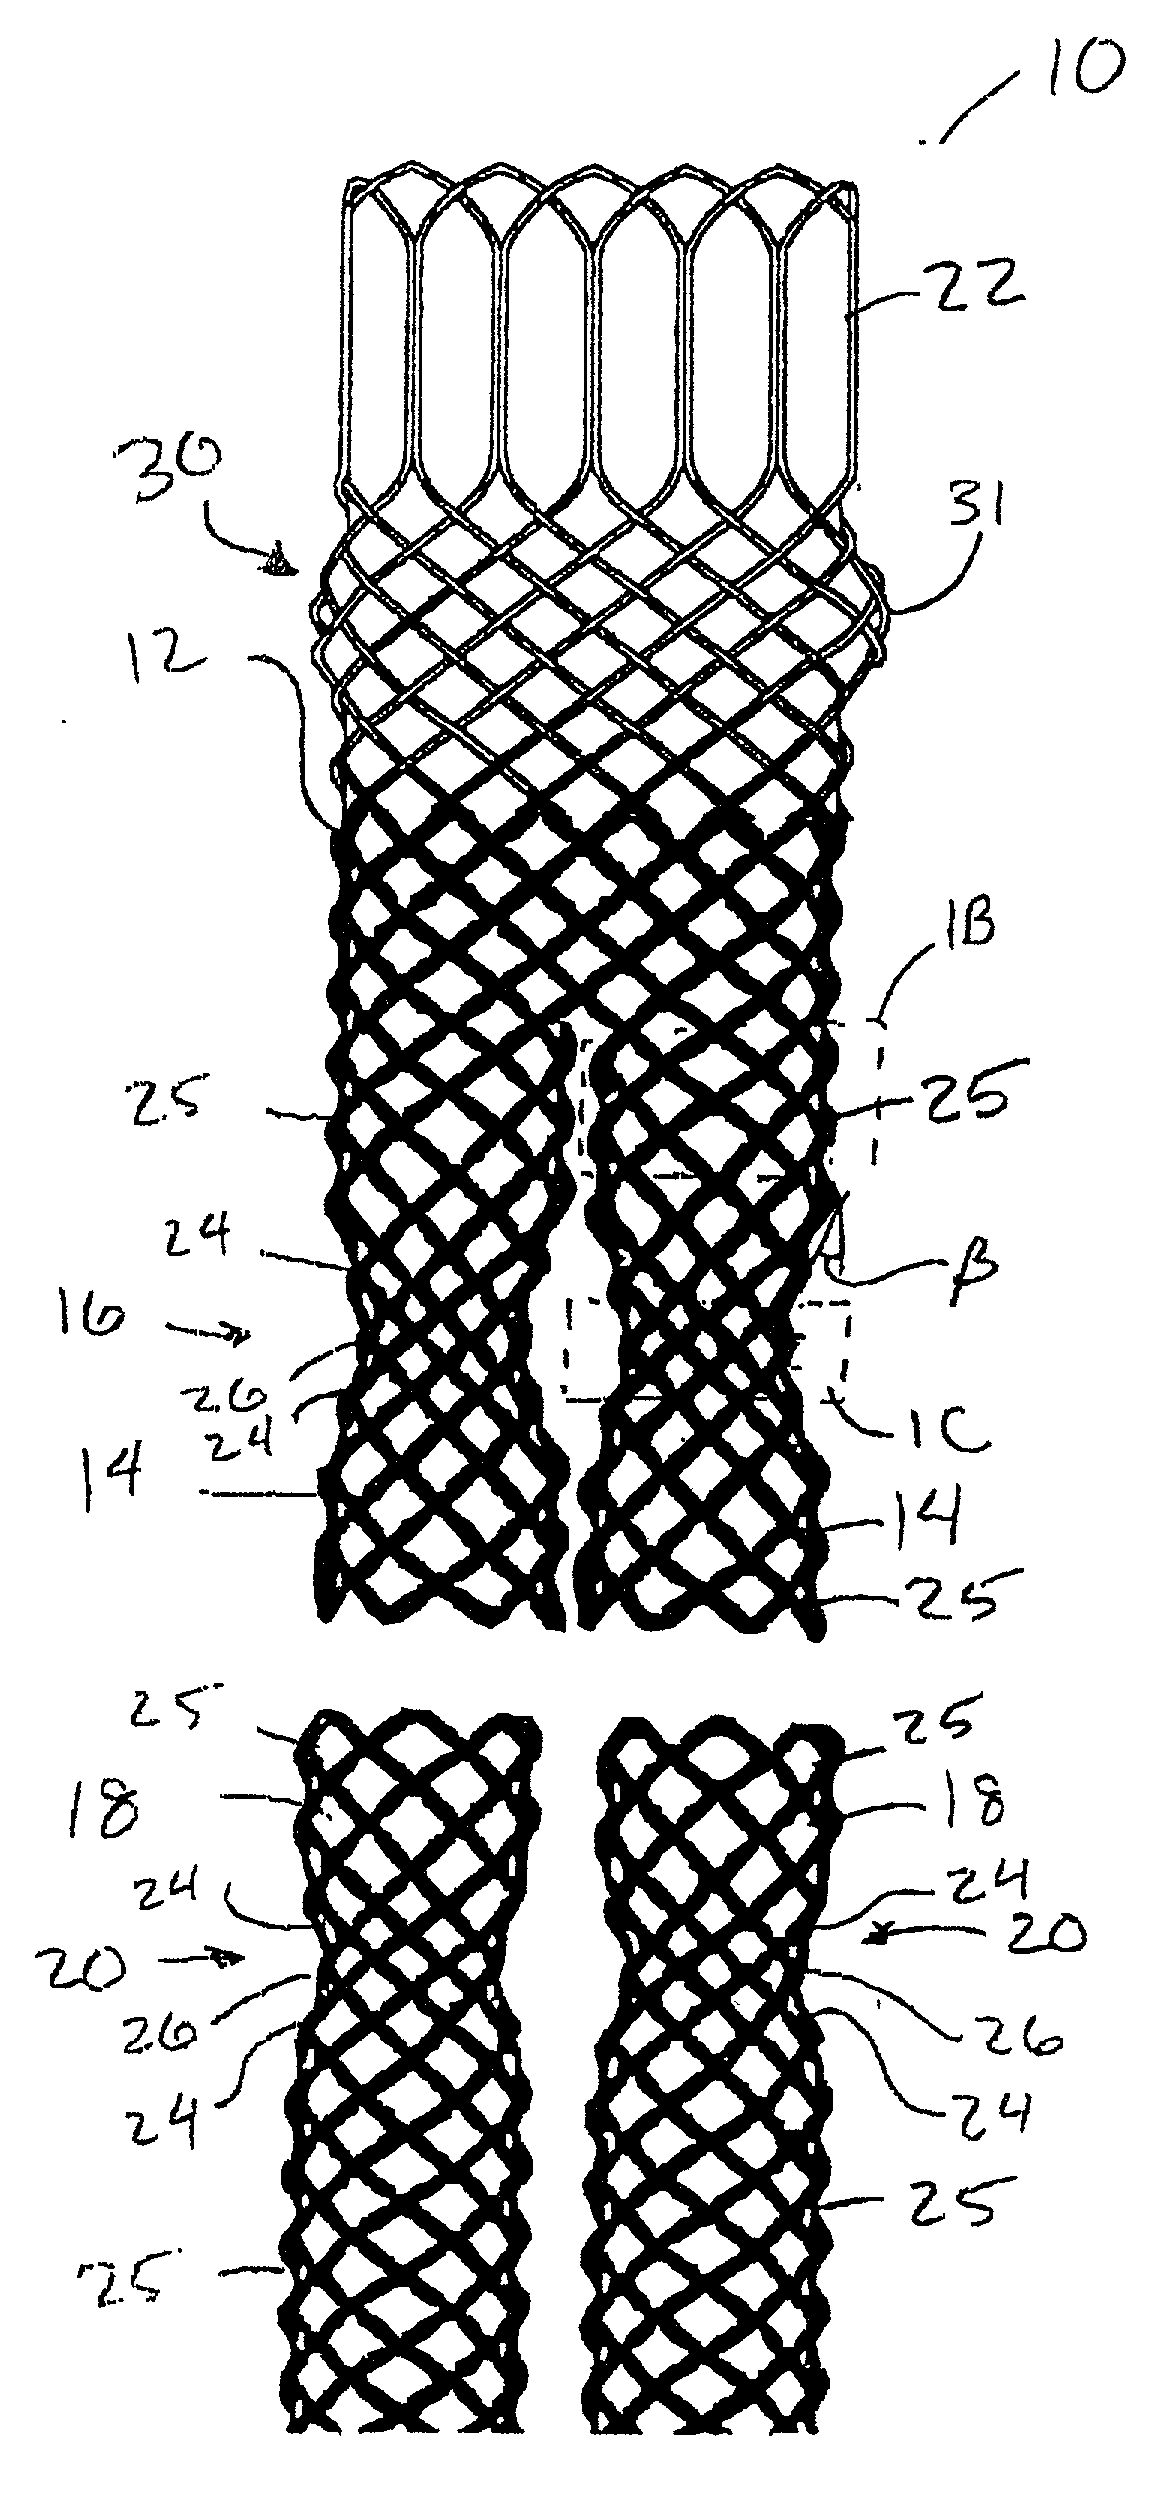 Braided modular stent with hourglass-shaped interfaces